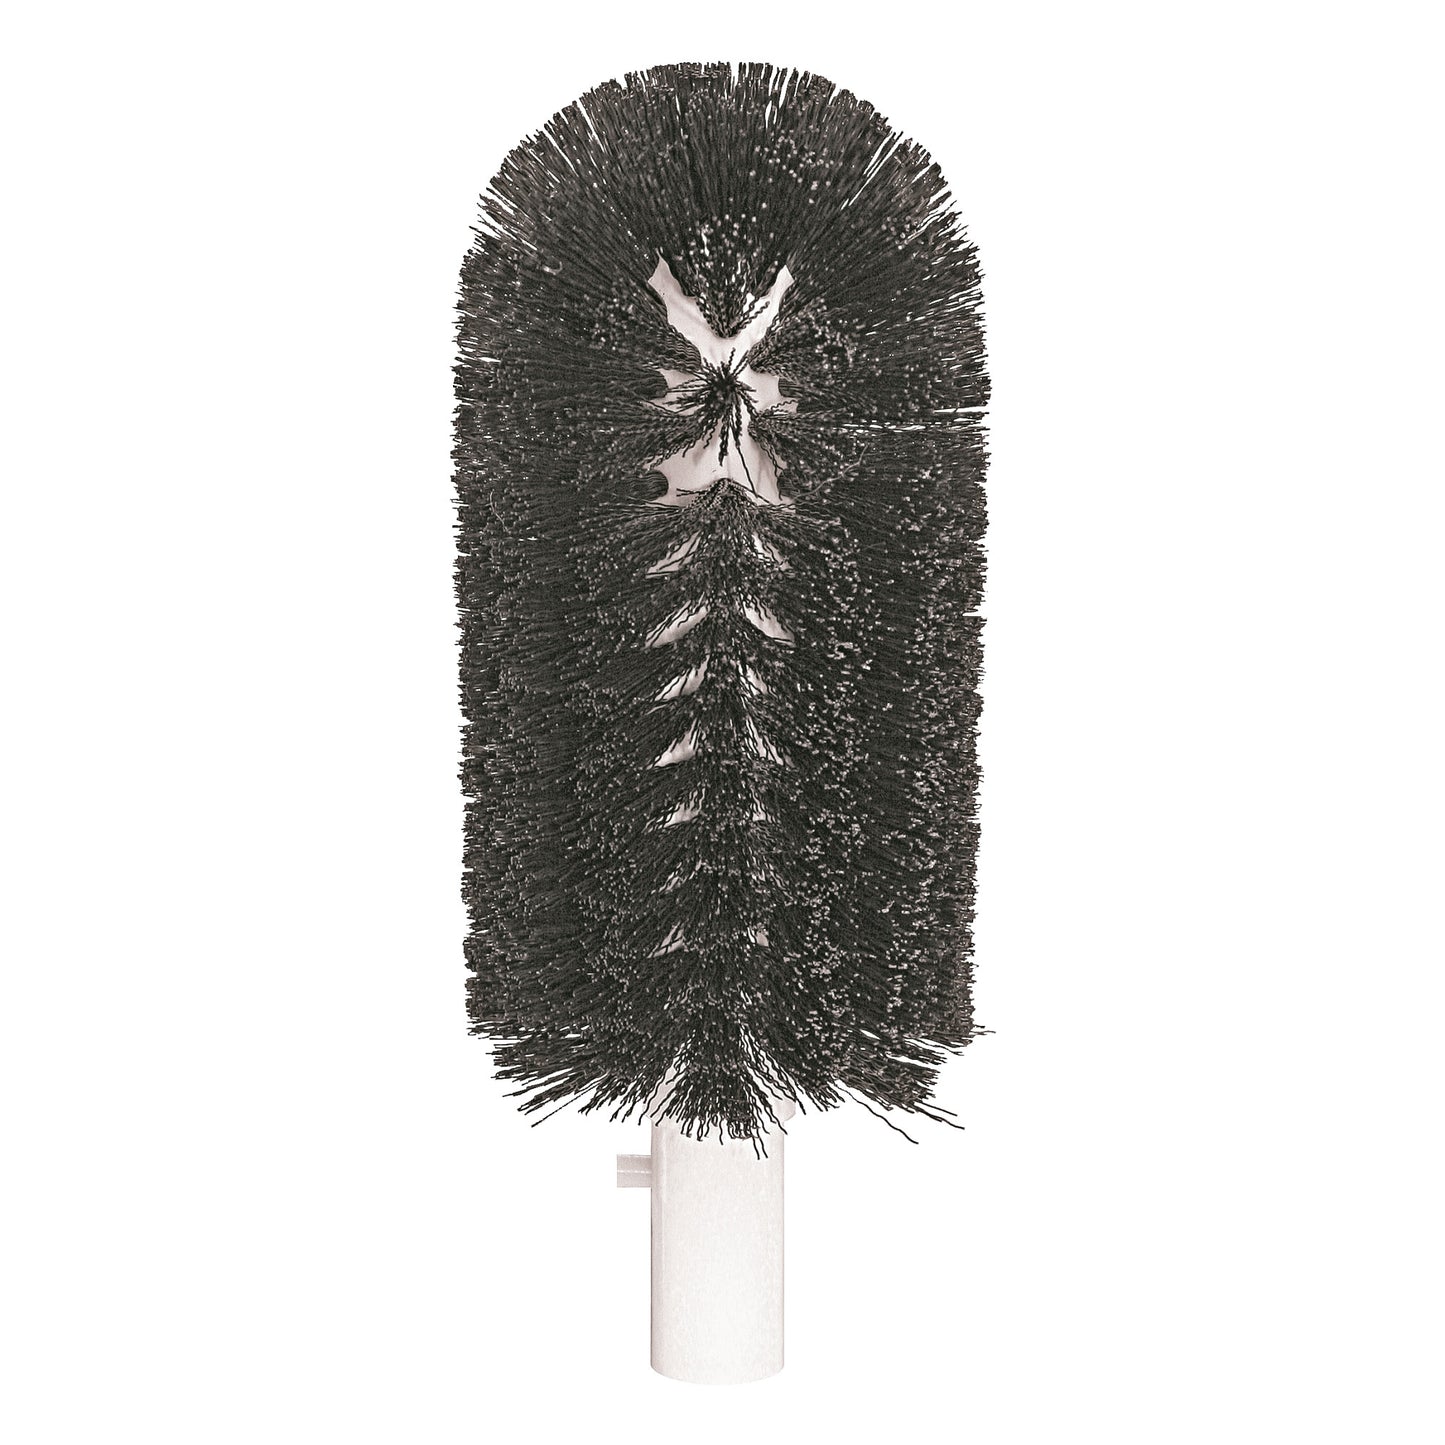 BRS-920 - Bar Maid 6-3/4" Slightly Taller Glassware Brush for Glass Washers, Pinned